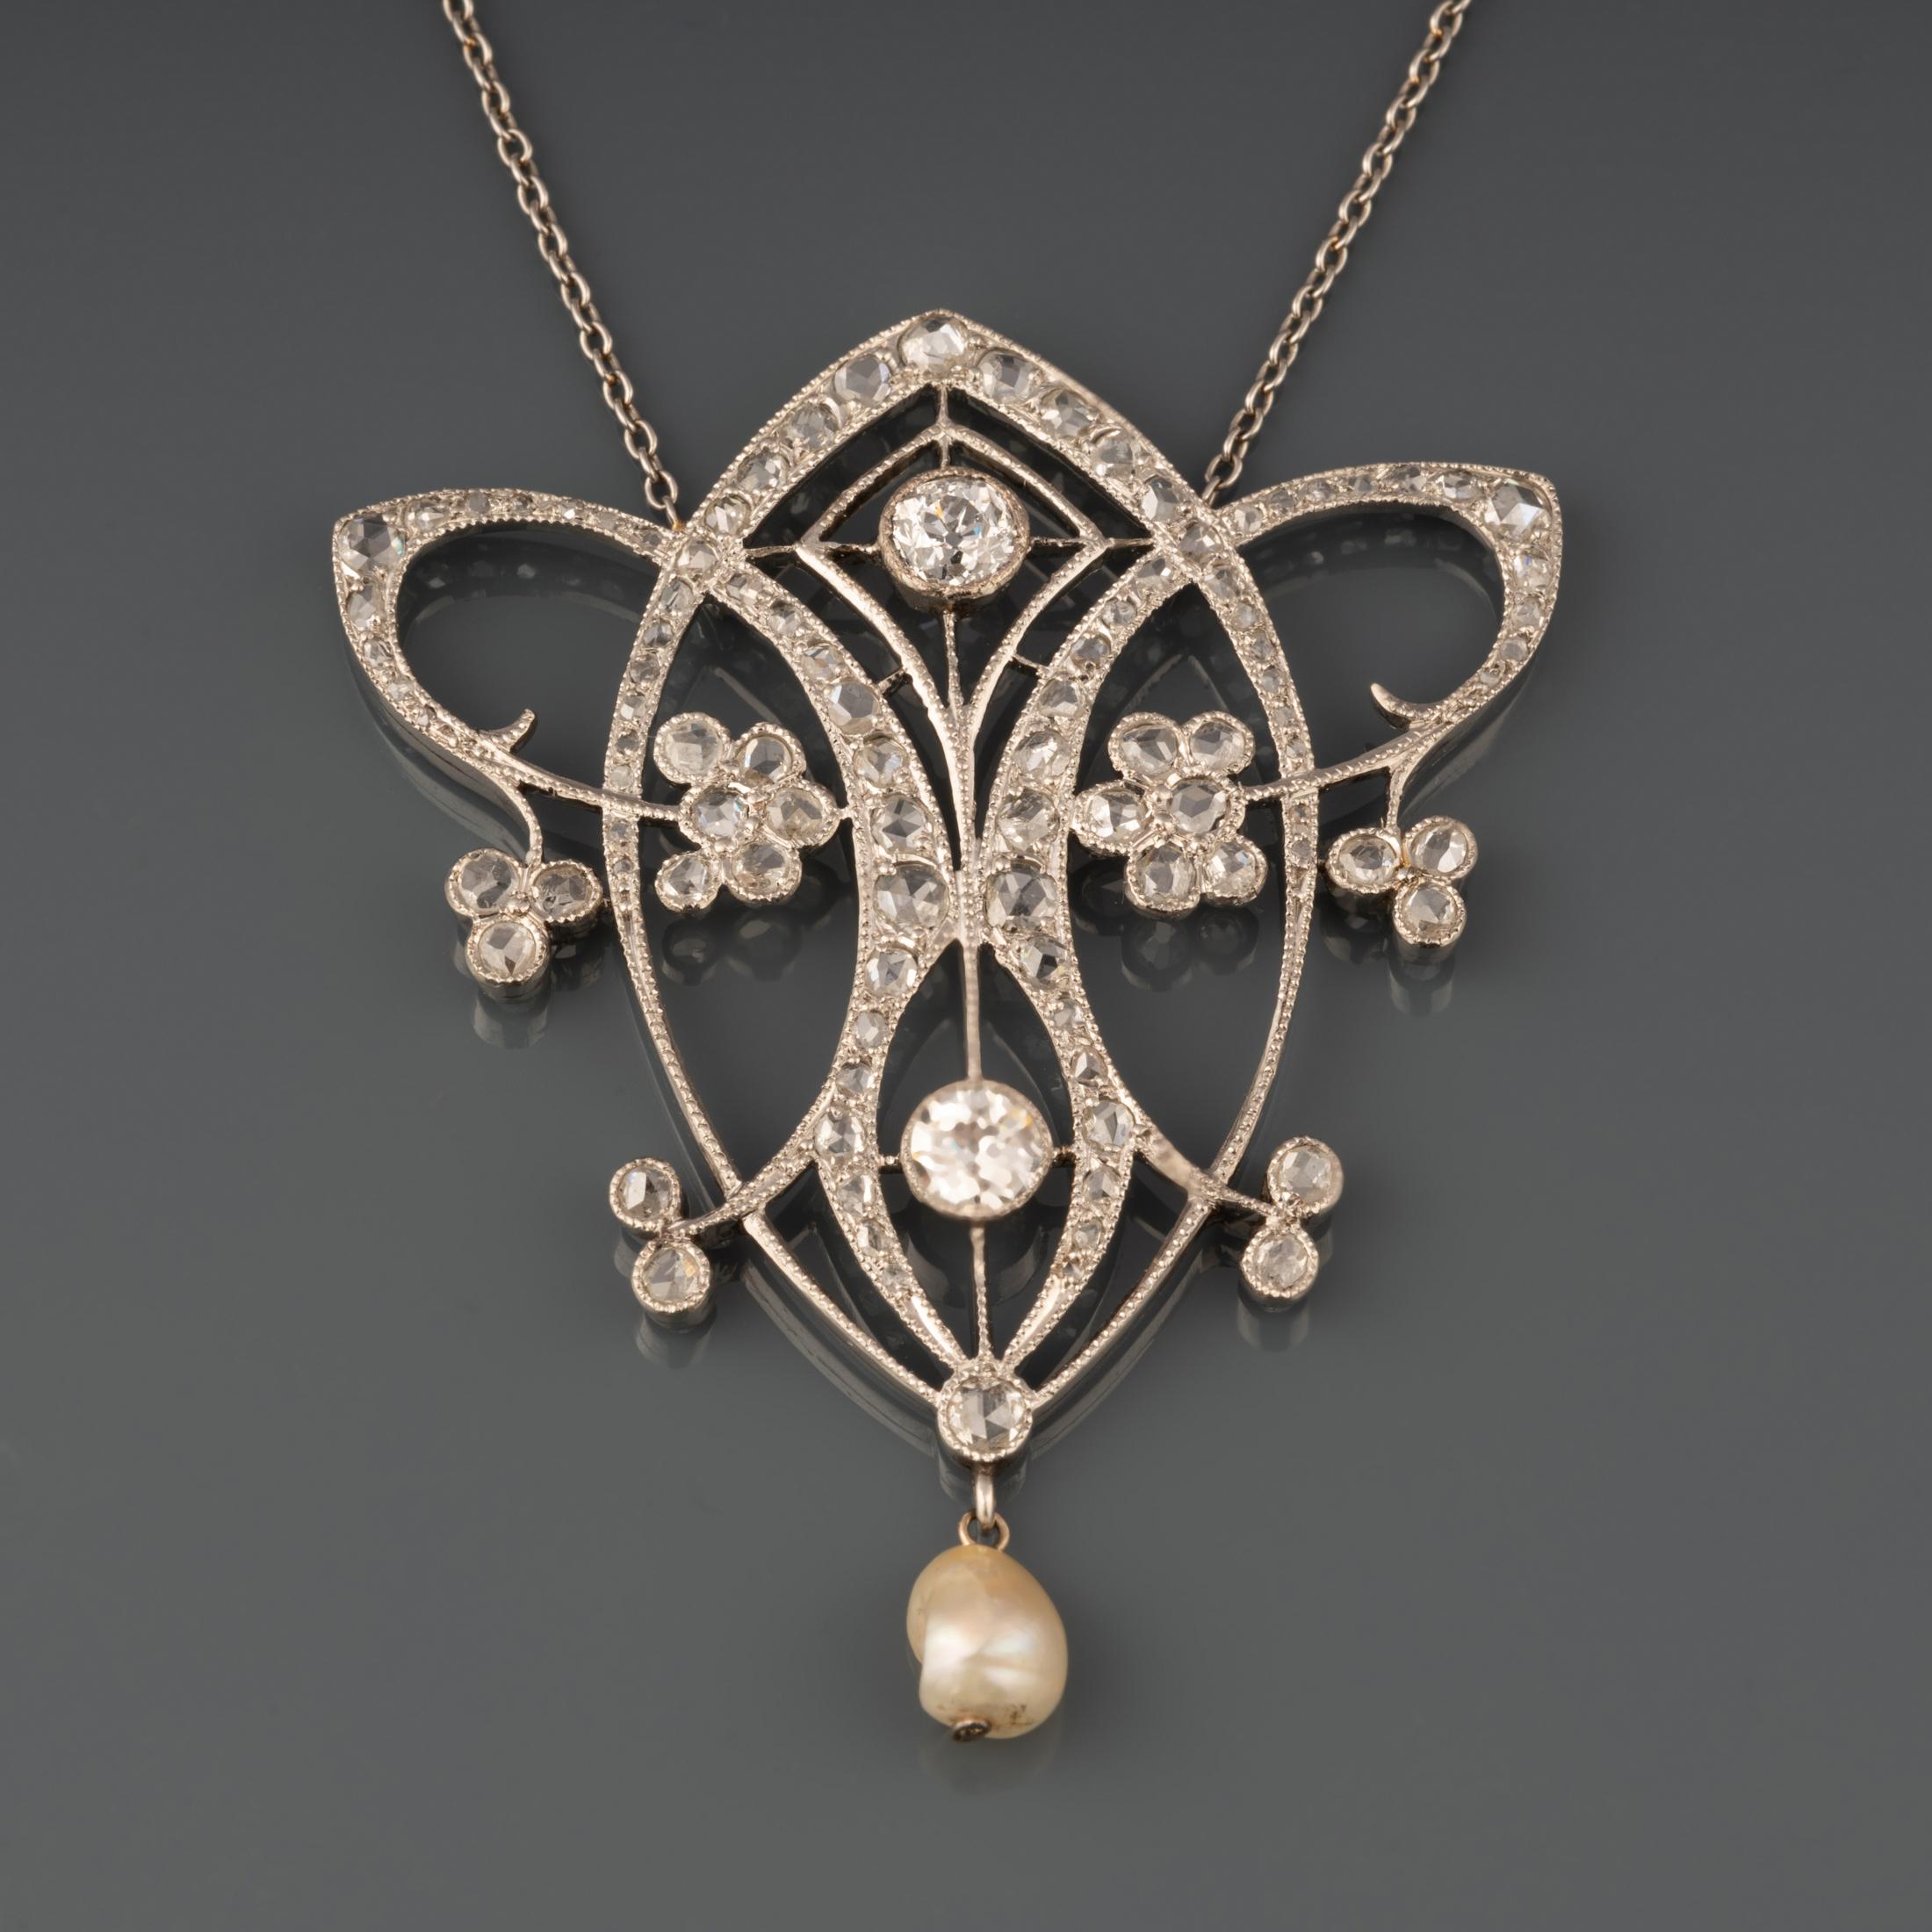 A very beautiful antique pendant necklace, made circa 1900.

Made in platinum and set with Old European cut and rose cut diamonds.

The bigger diamonds weights 0.40 carats each approximately.

The necklace length is 42 cm.

The pearl is probably a